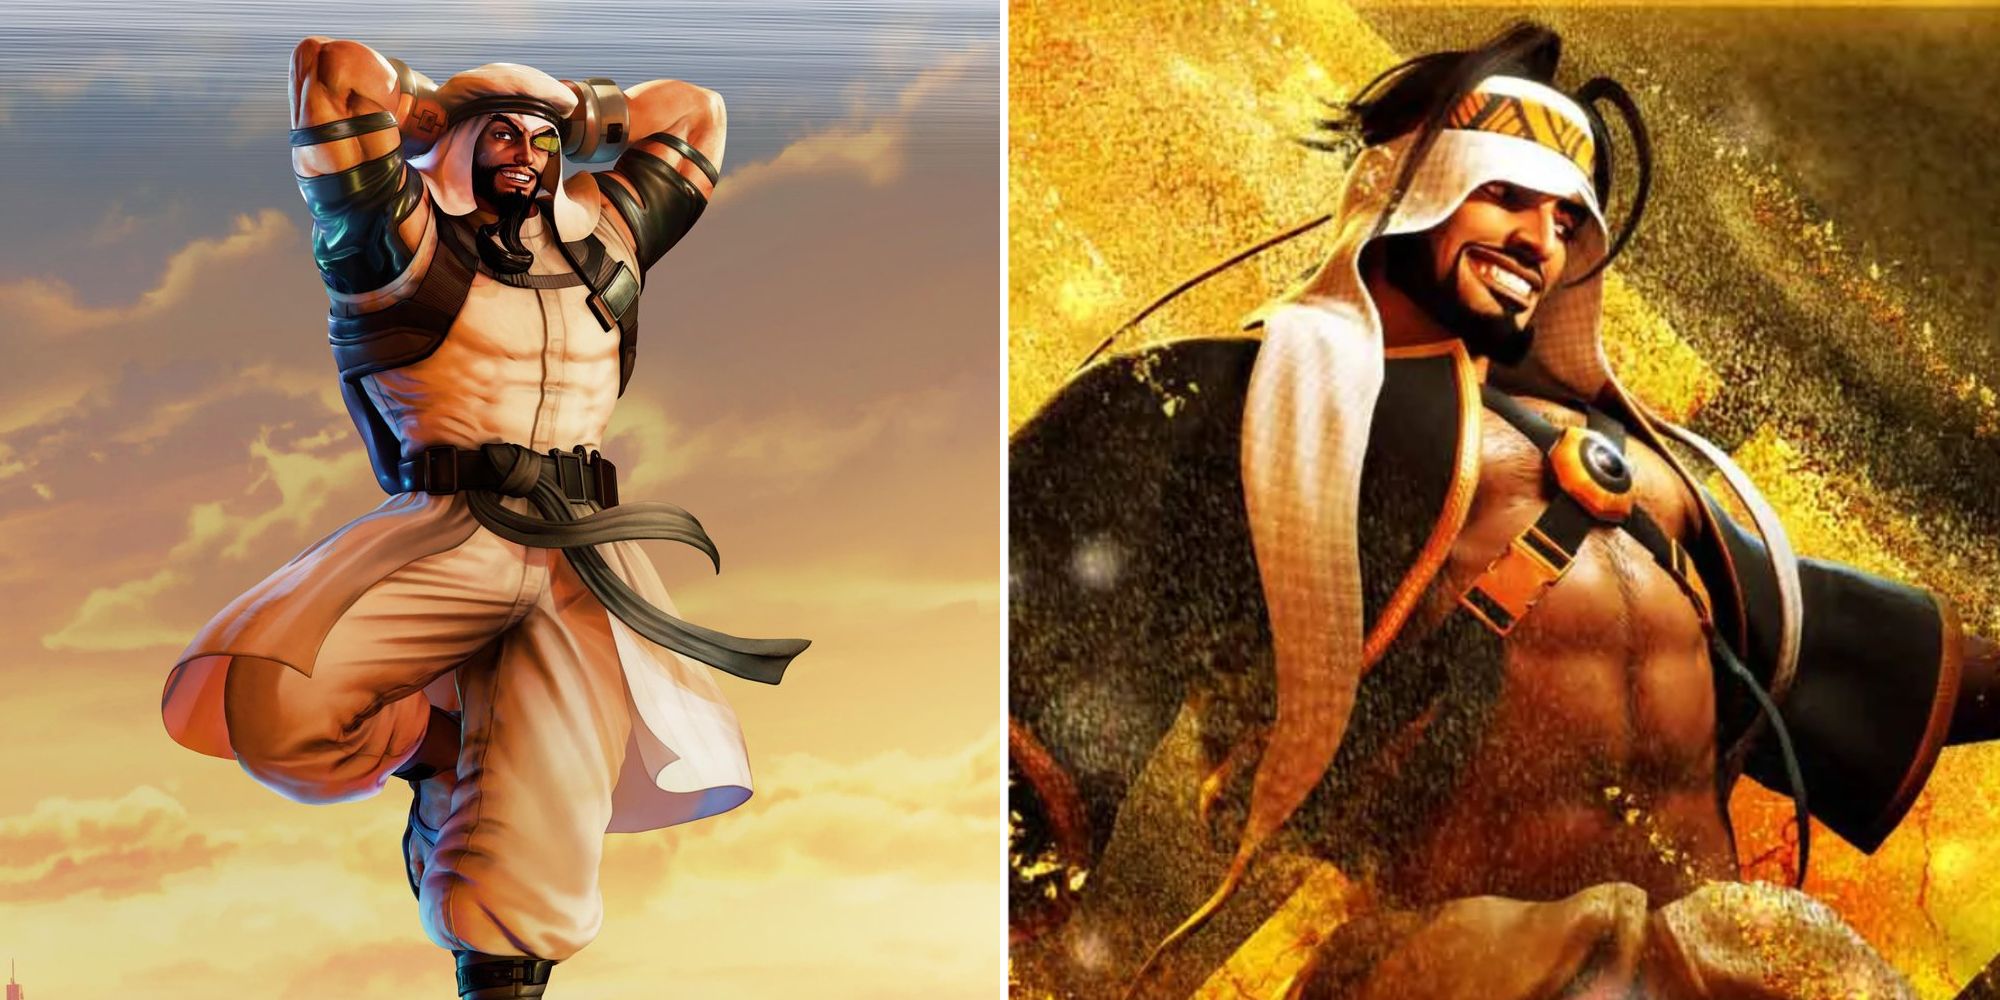 Rashid character arts for both Street Fighter V and Street Fighter 6